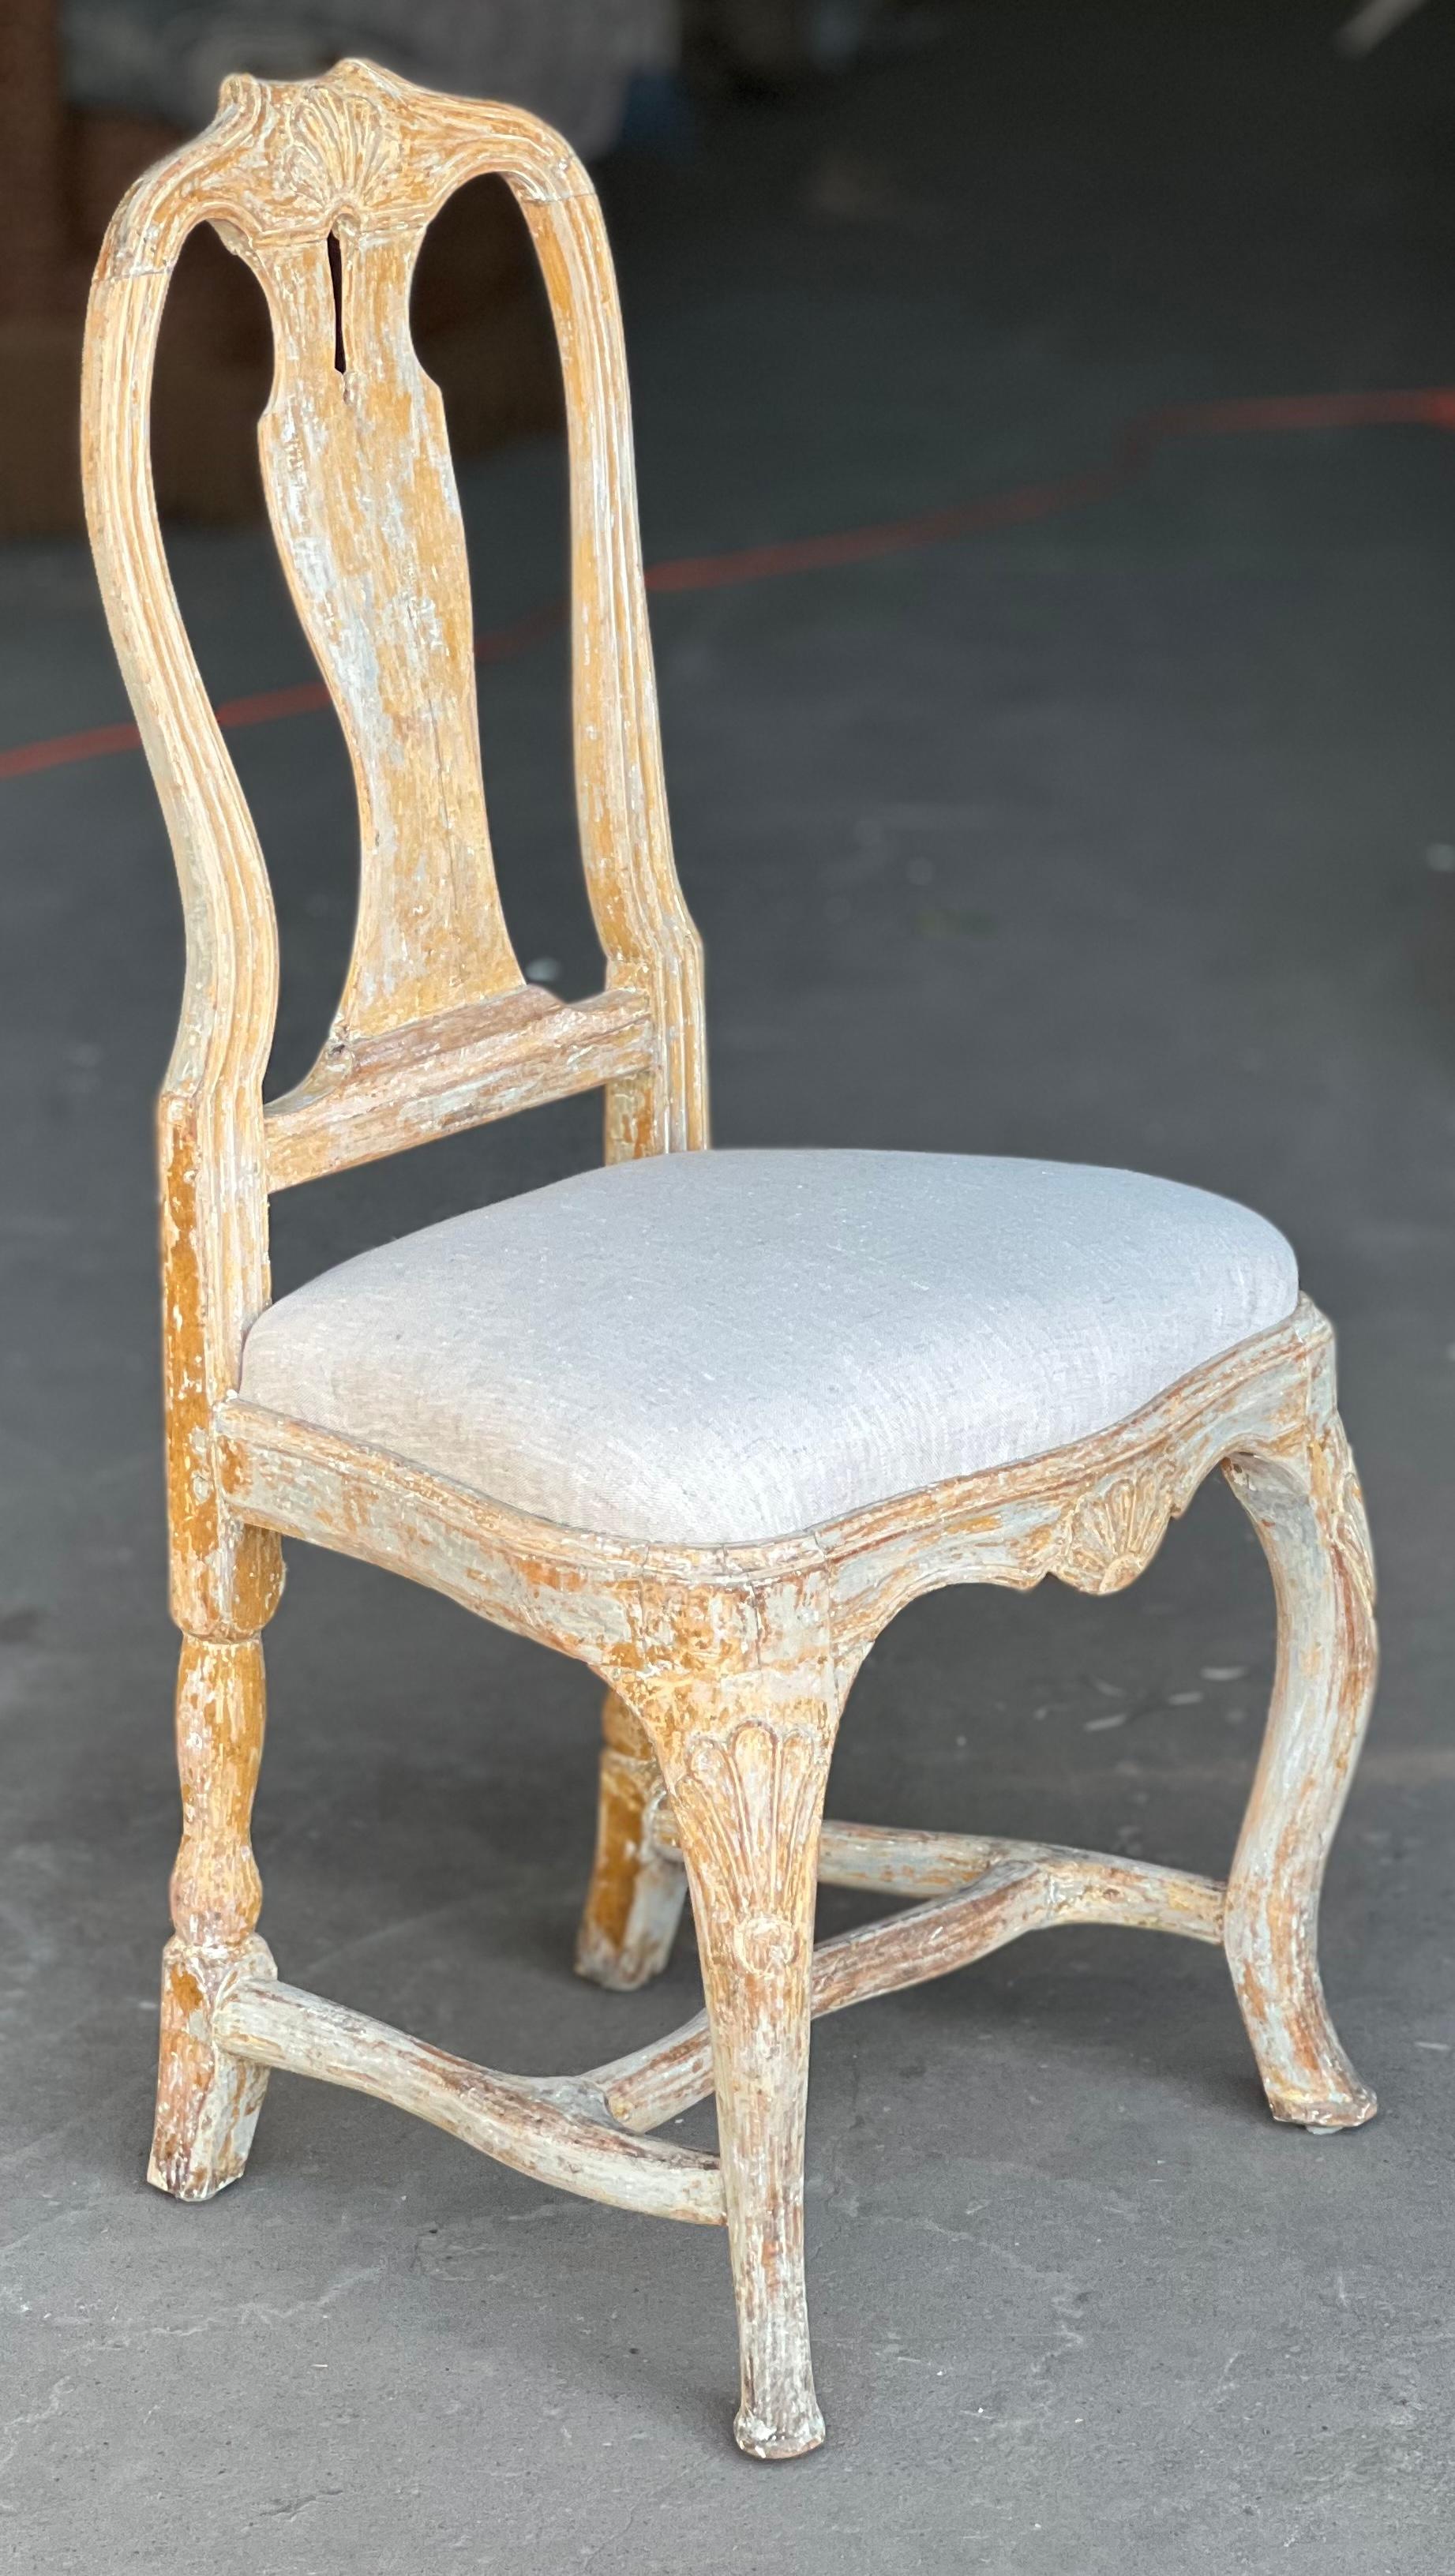 Hand-Crafted 18th Century Swedish Rococo Pair of Chairs For Sale